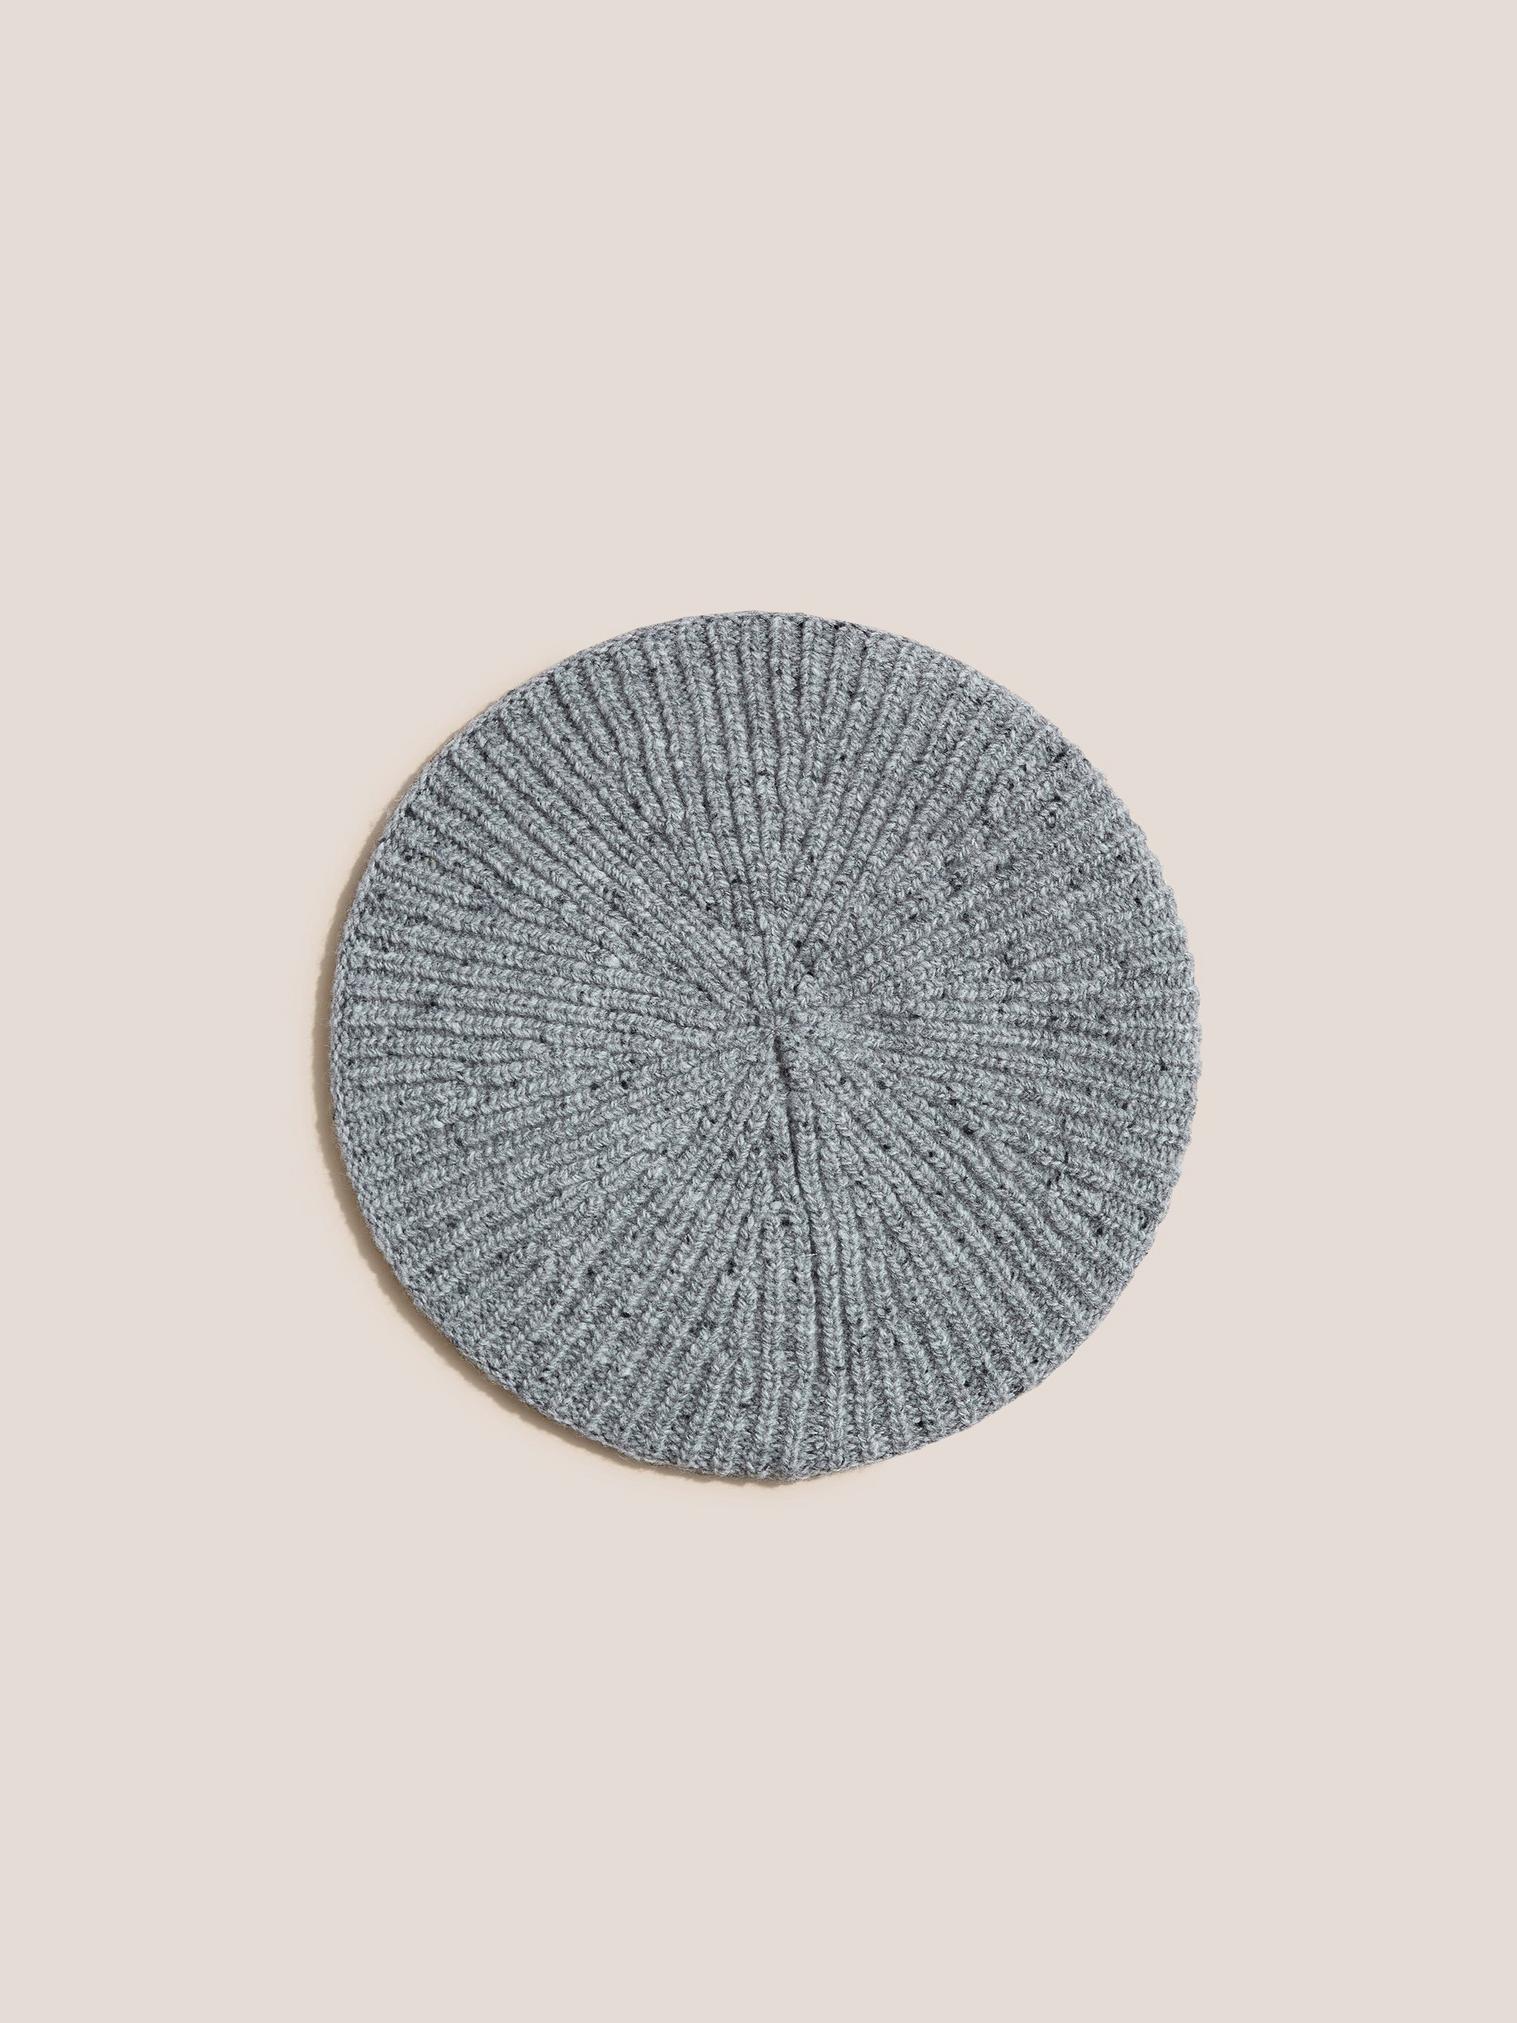 Neppy Beret in LGT GREY - FLAT FRONT